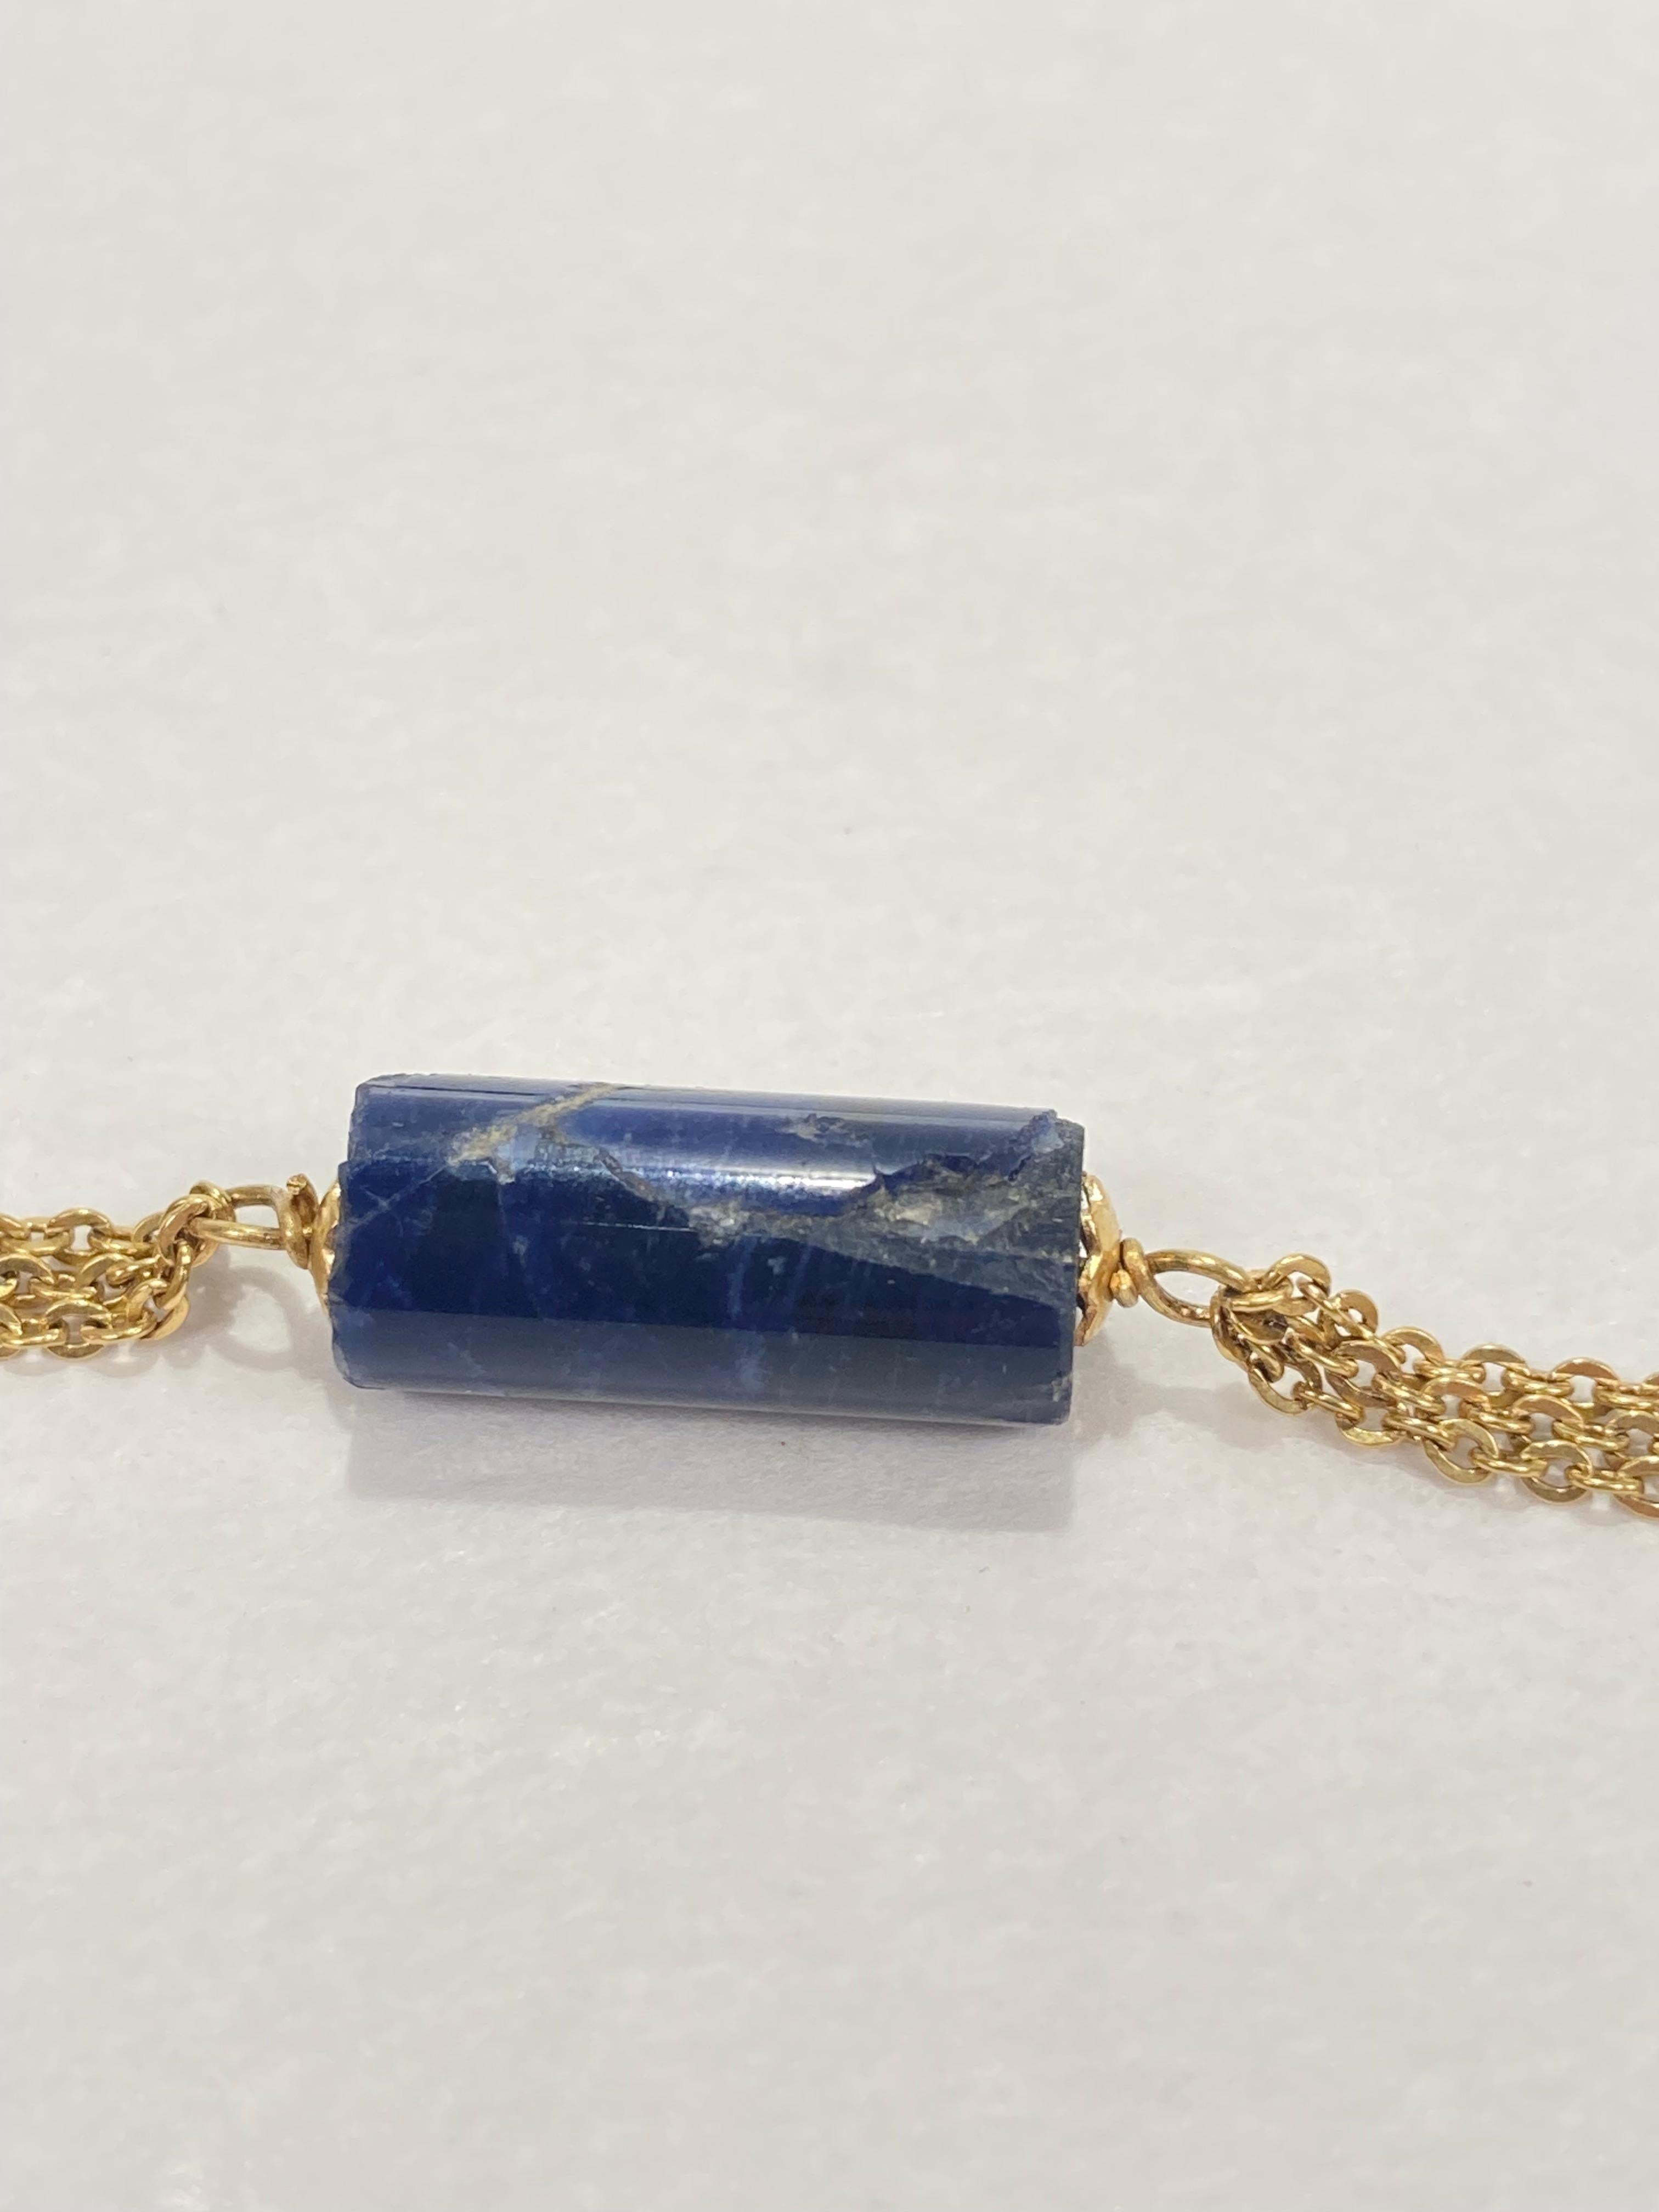 Signed 18 Karat Gold and Lapis Beaded Rope Length Necklace by Filippini Fratteli For Sale 6